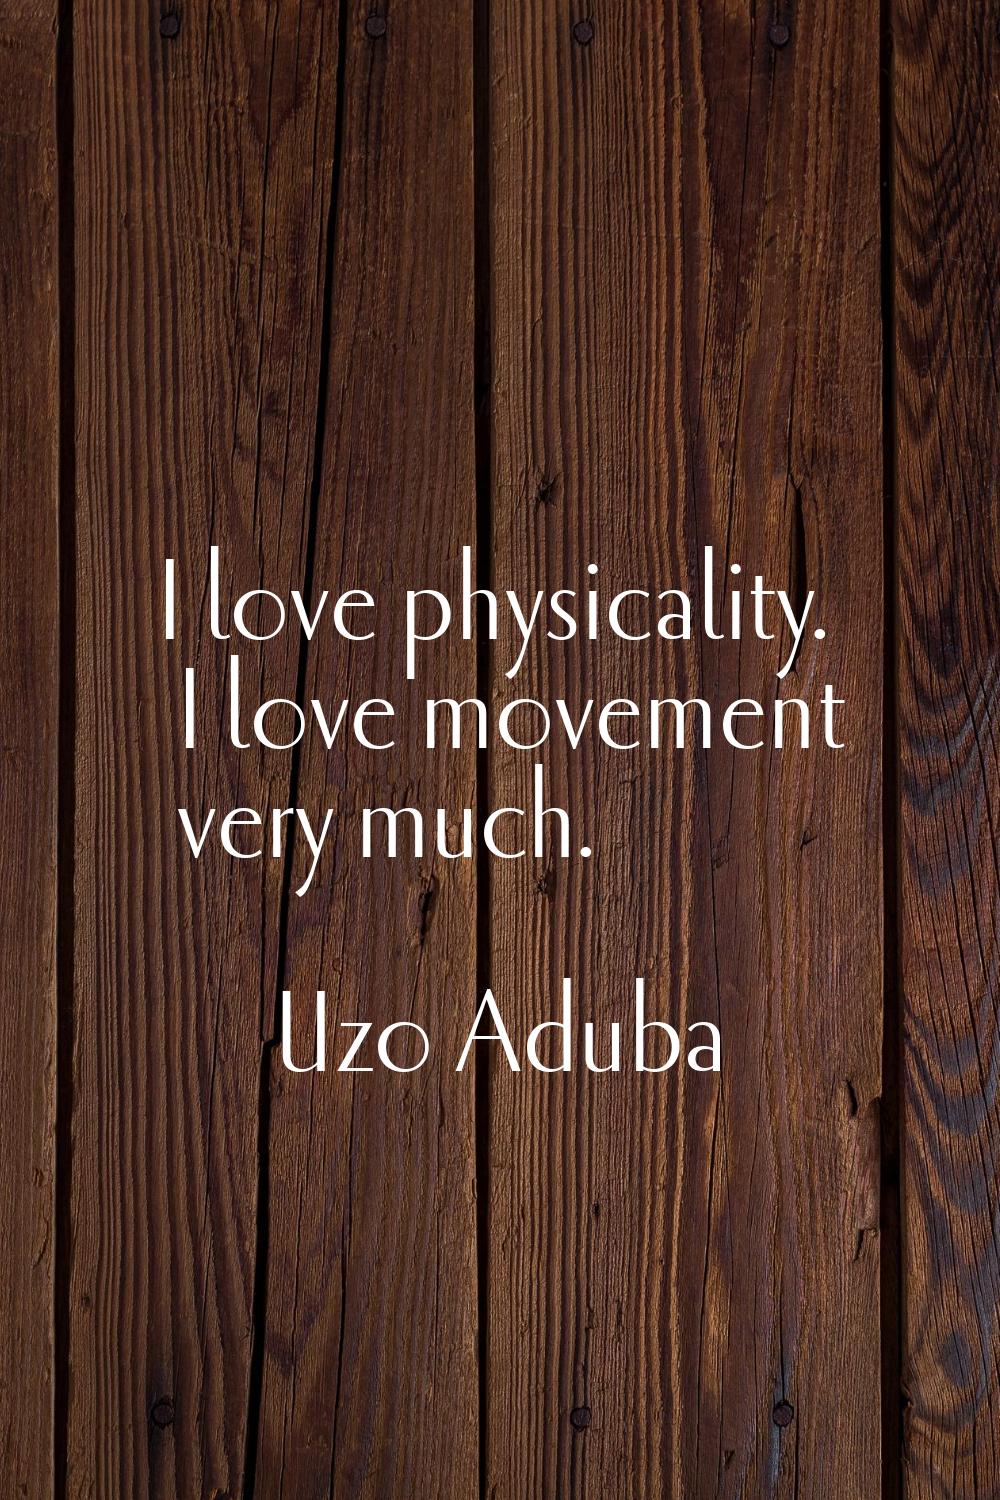 I love physicality. I love movement very much.